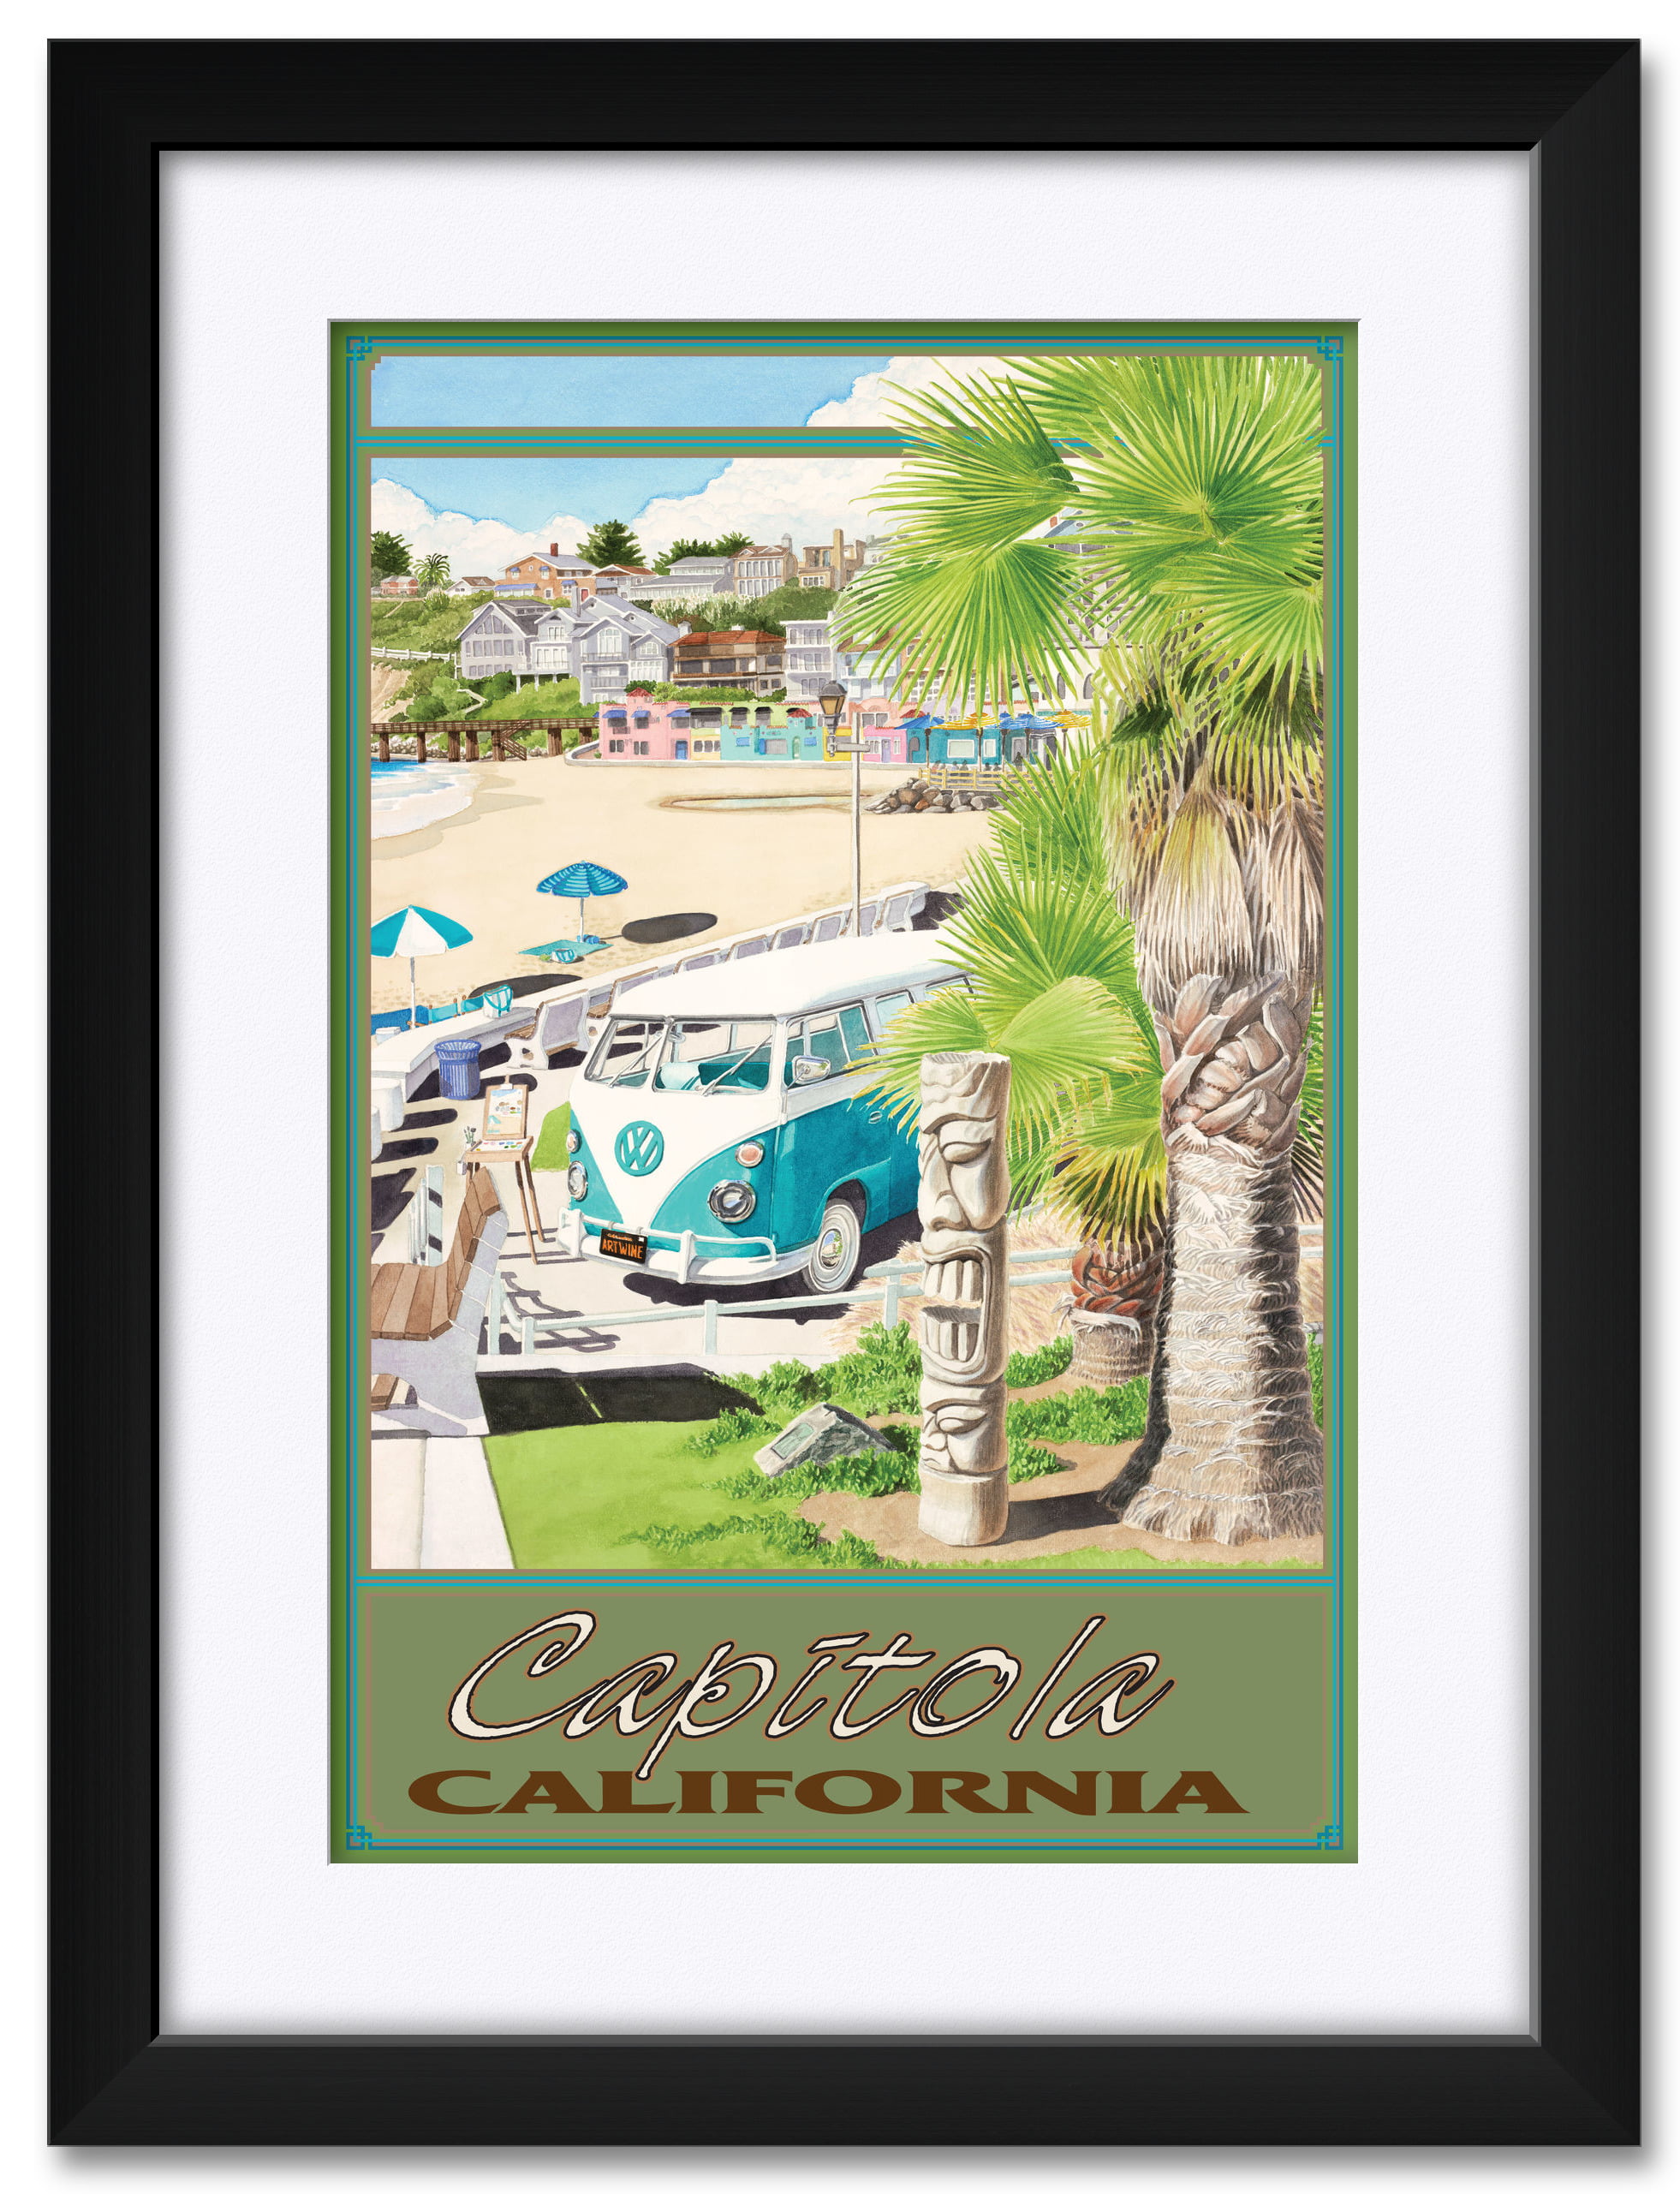 Capitola California Tiki Framed & Matted Art Print by Evelyn Jenkins Drew. Print Size 12" x 18